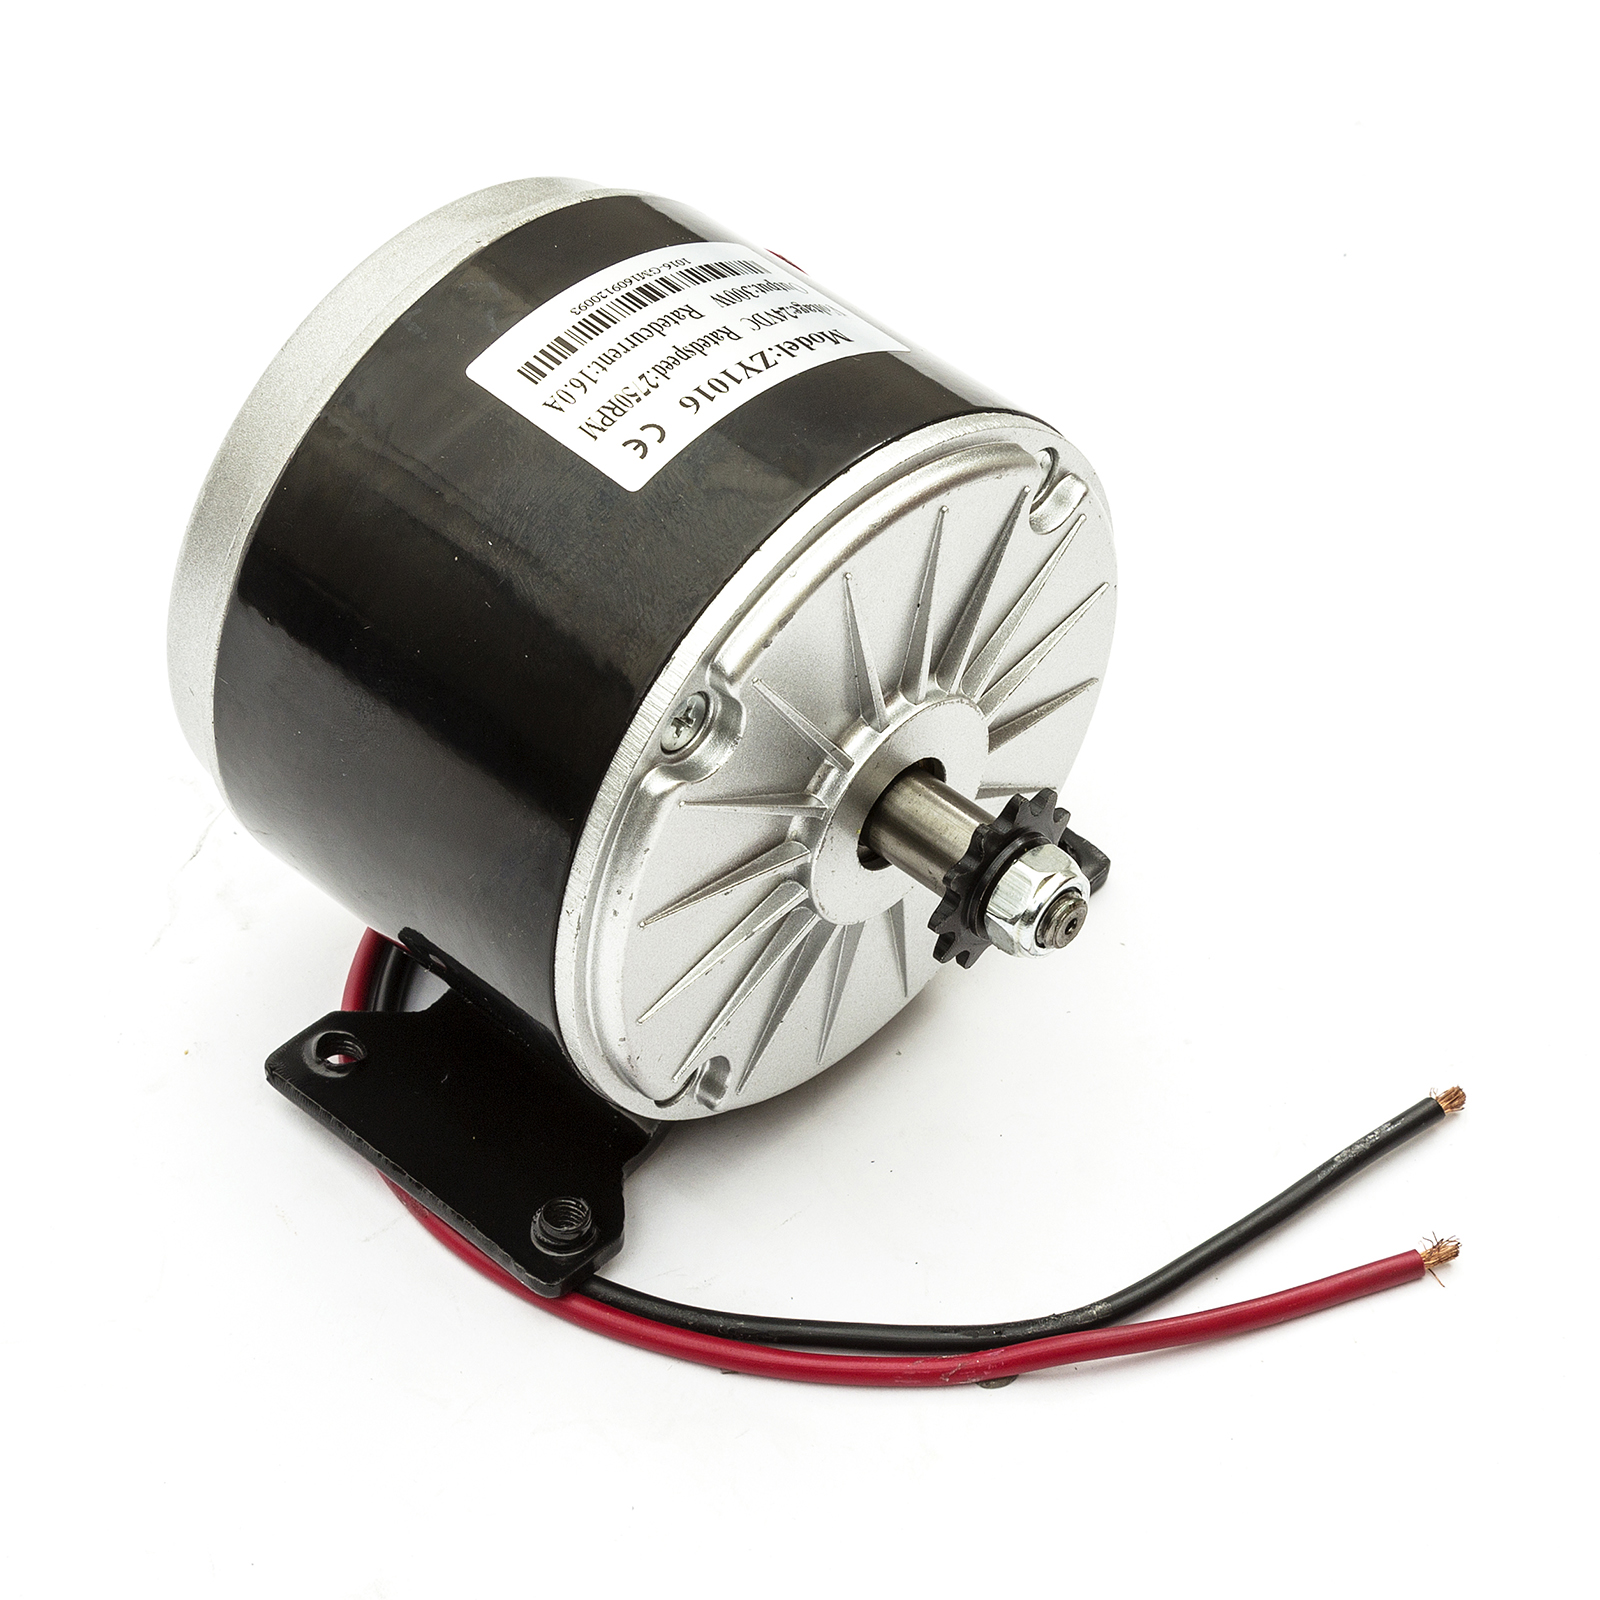 24 volt electric scooter motor